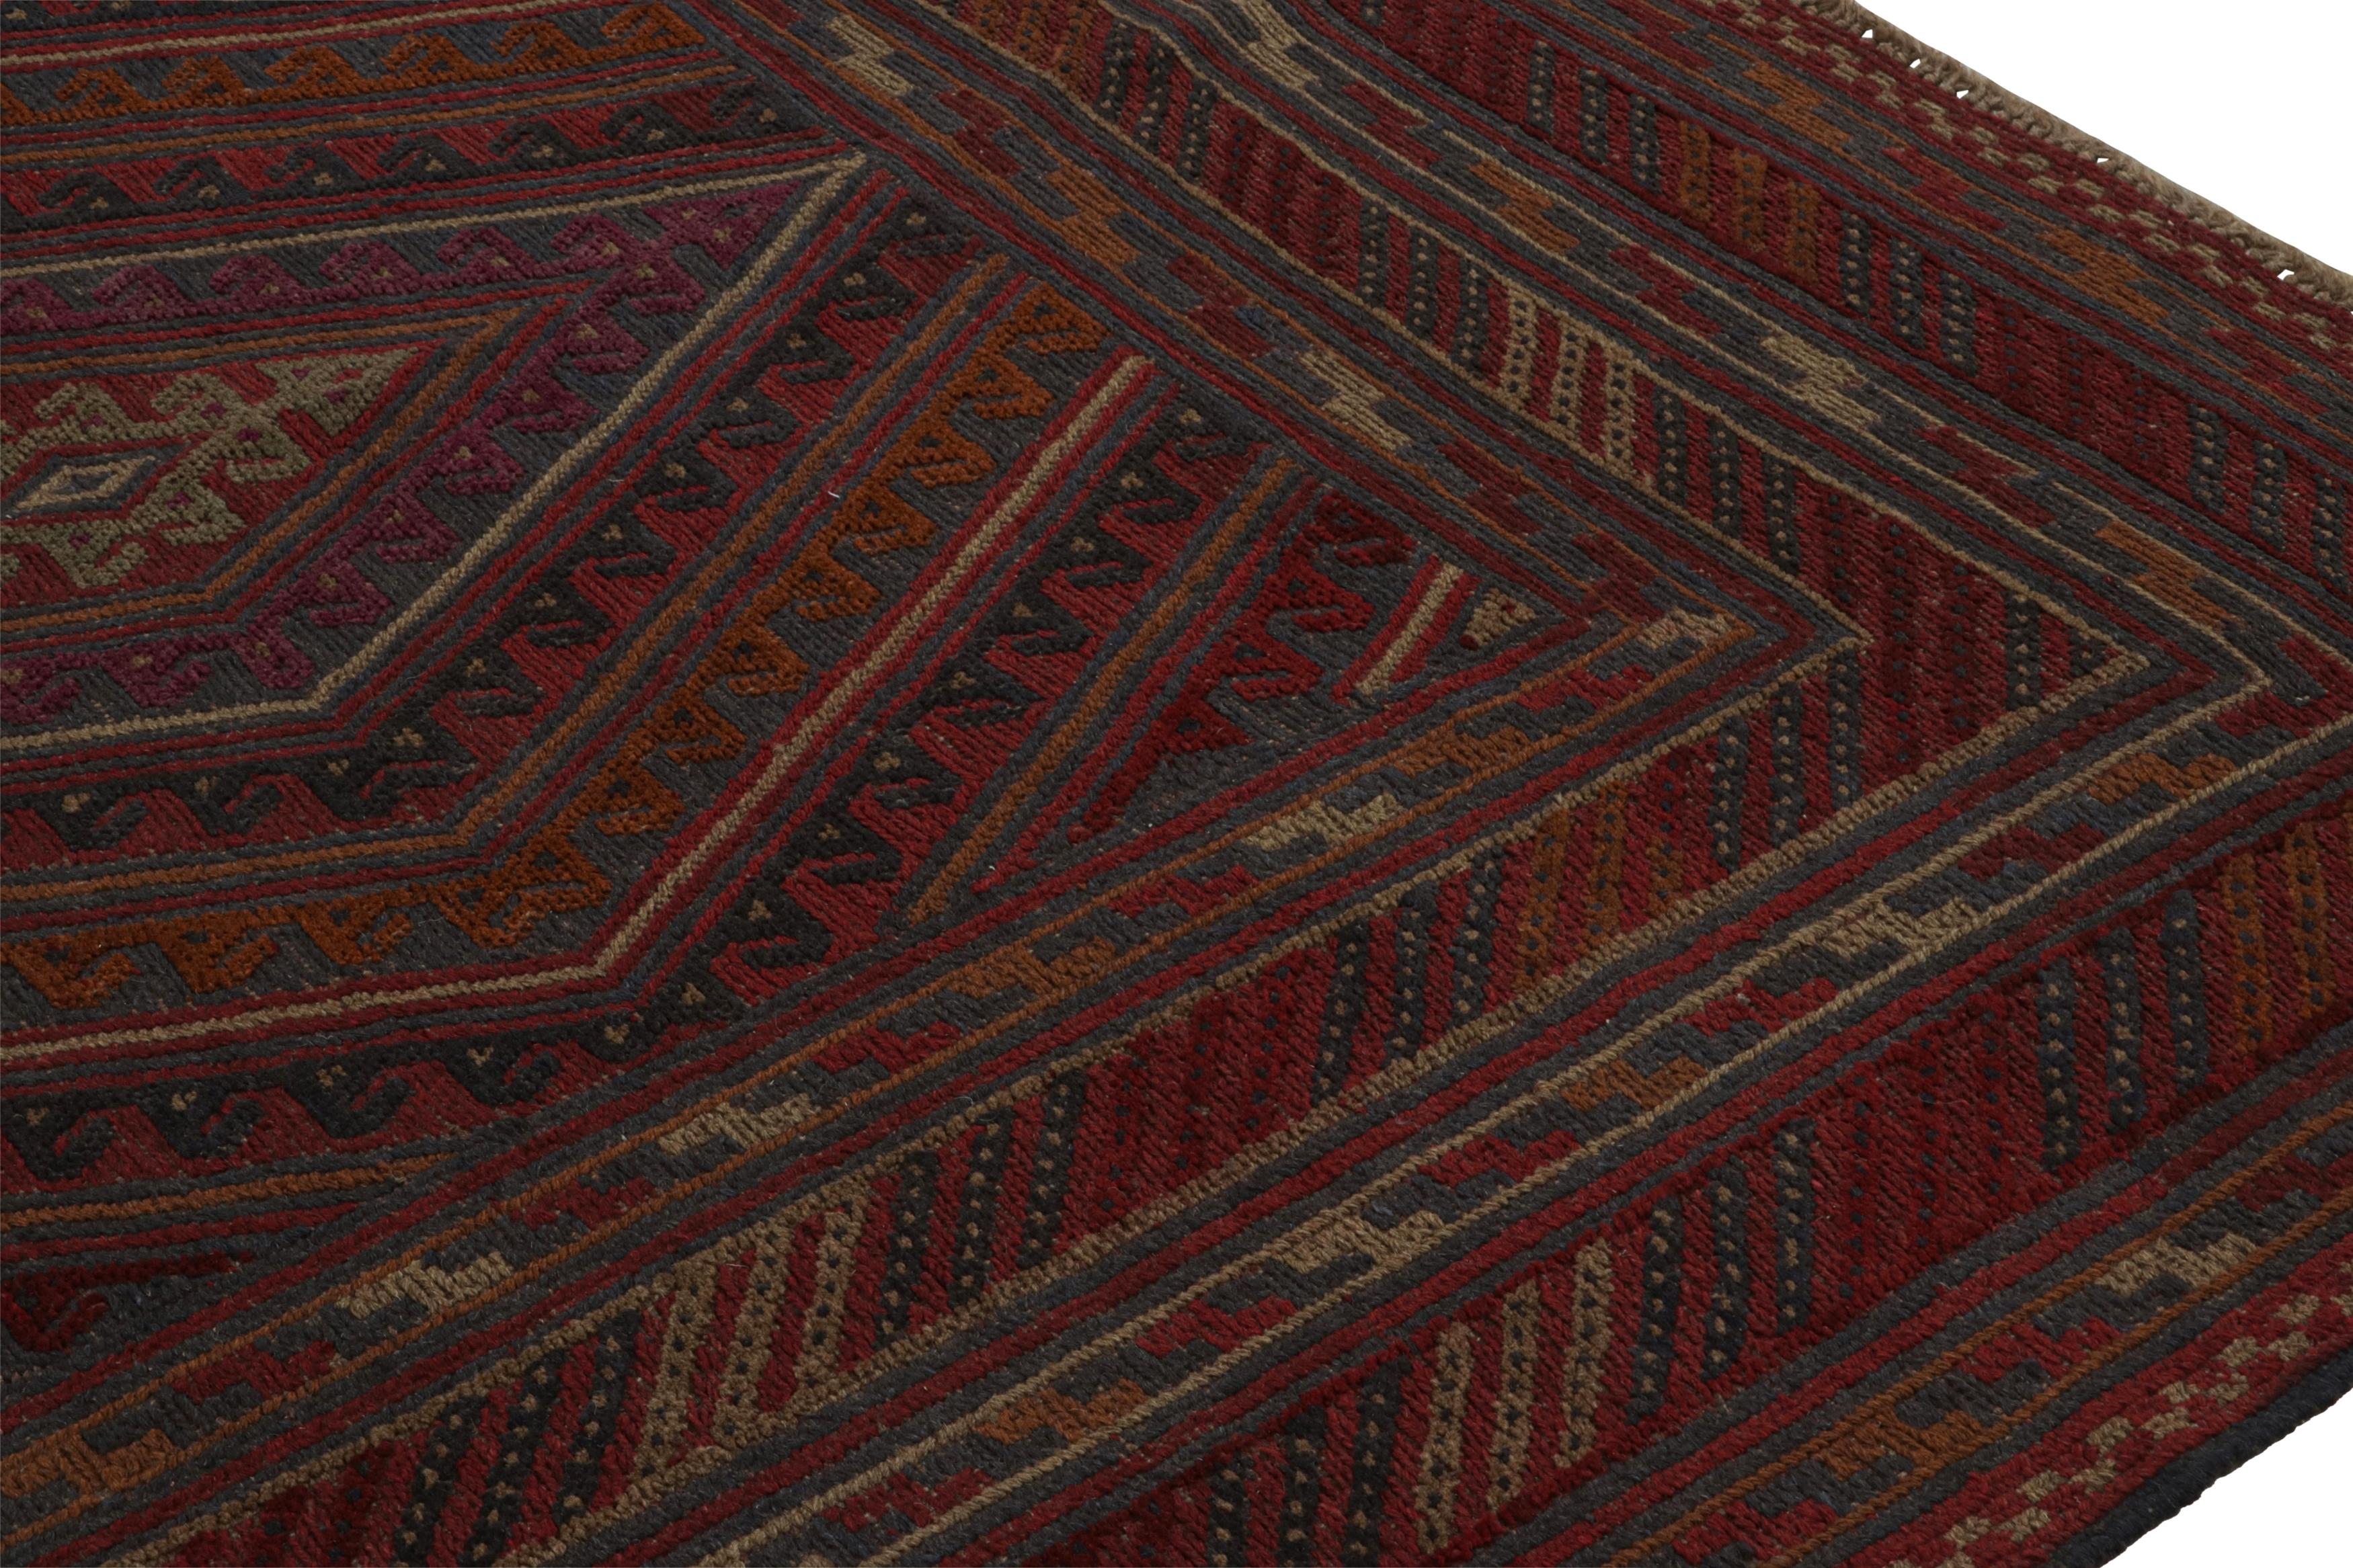 Rug & Kilim’s Mashwani Afghan Baluch Rug in Red, Rust & Blue Geometric Patterns  In New Condition For Sale In Long Island City, NY